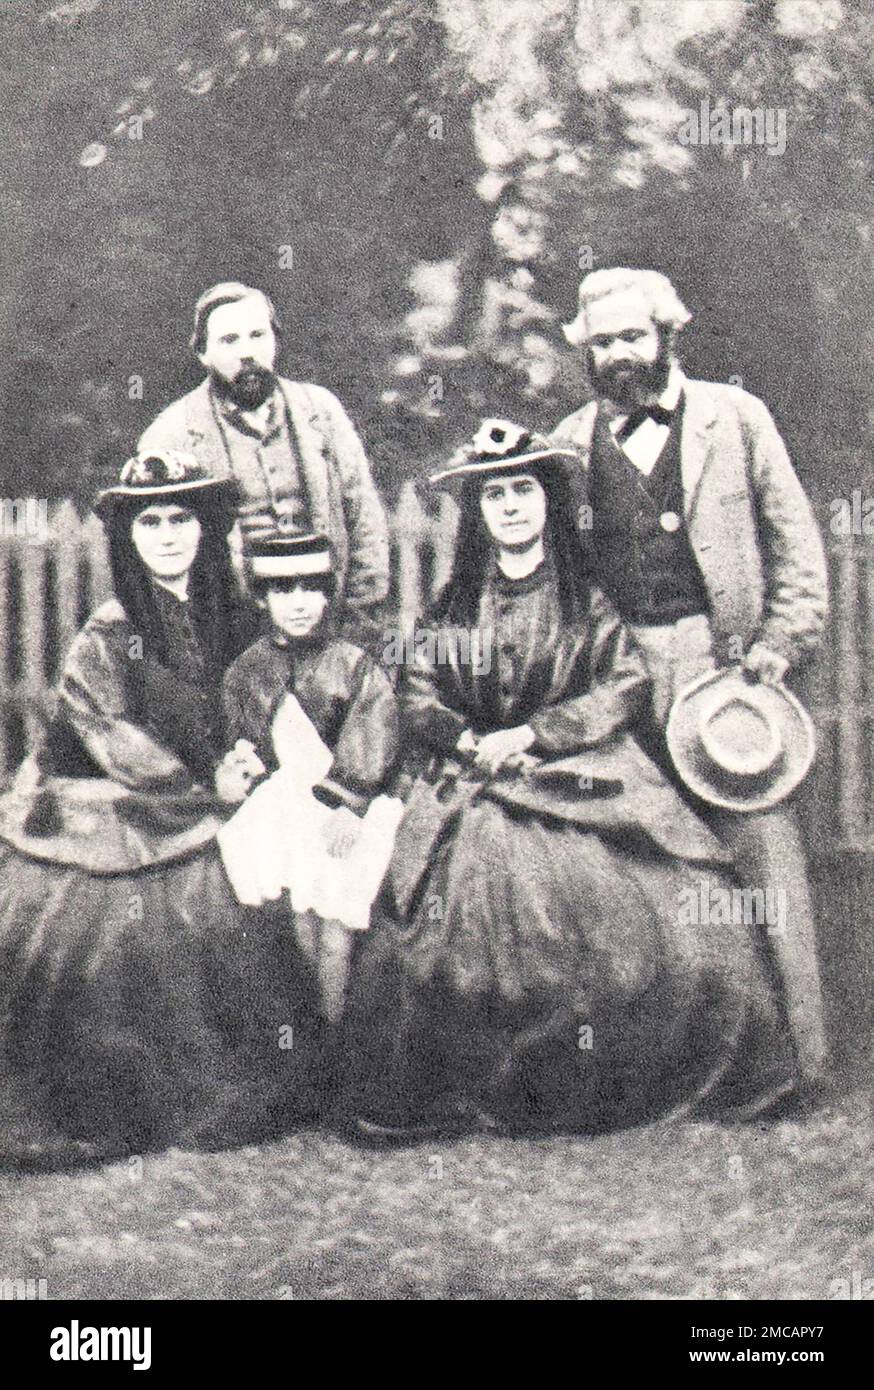 Karl Marx, Friedrich Engels and Karl Marx's daughters Eleanor and Laura. Photo from 1864. Stock Photo